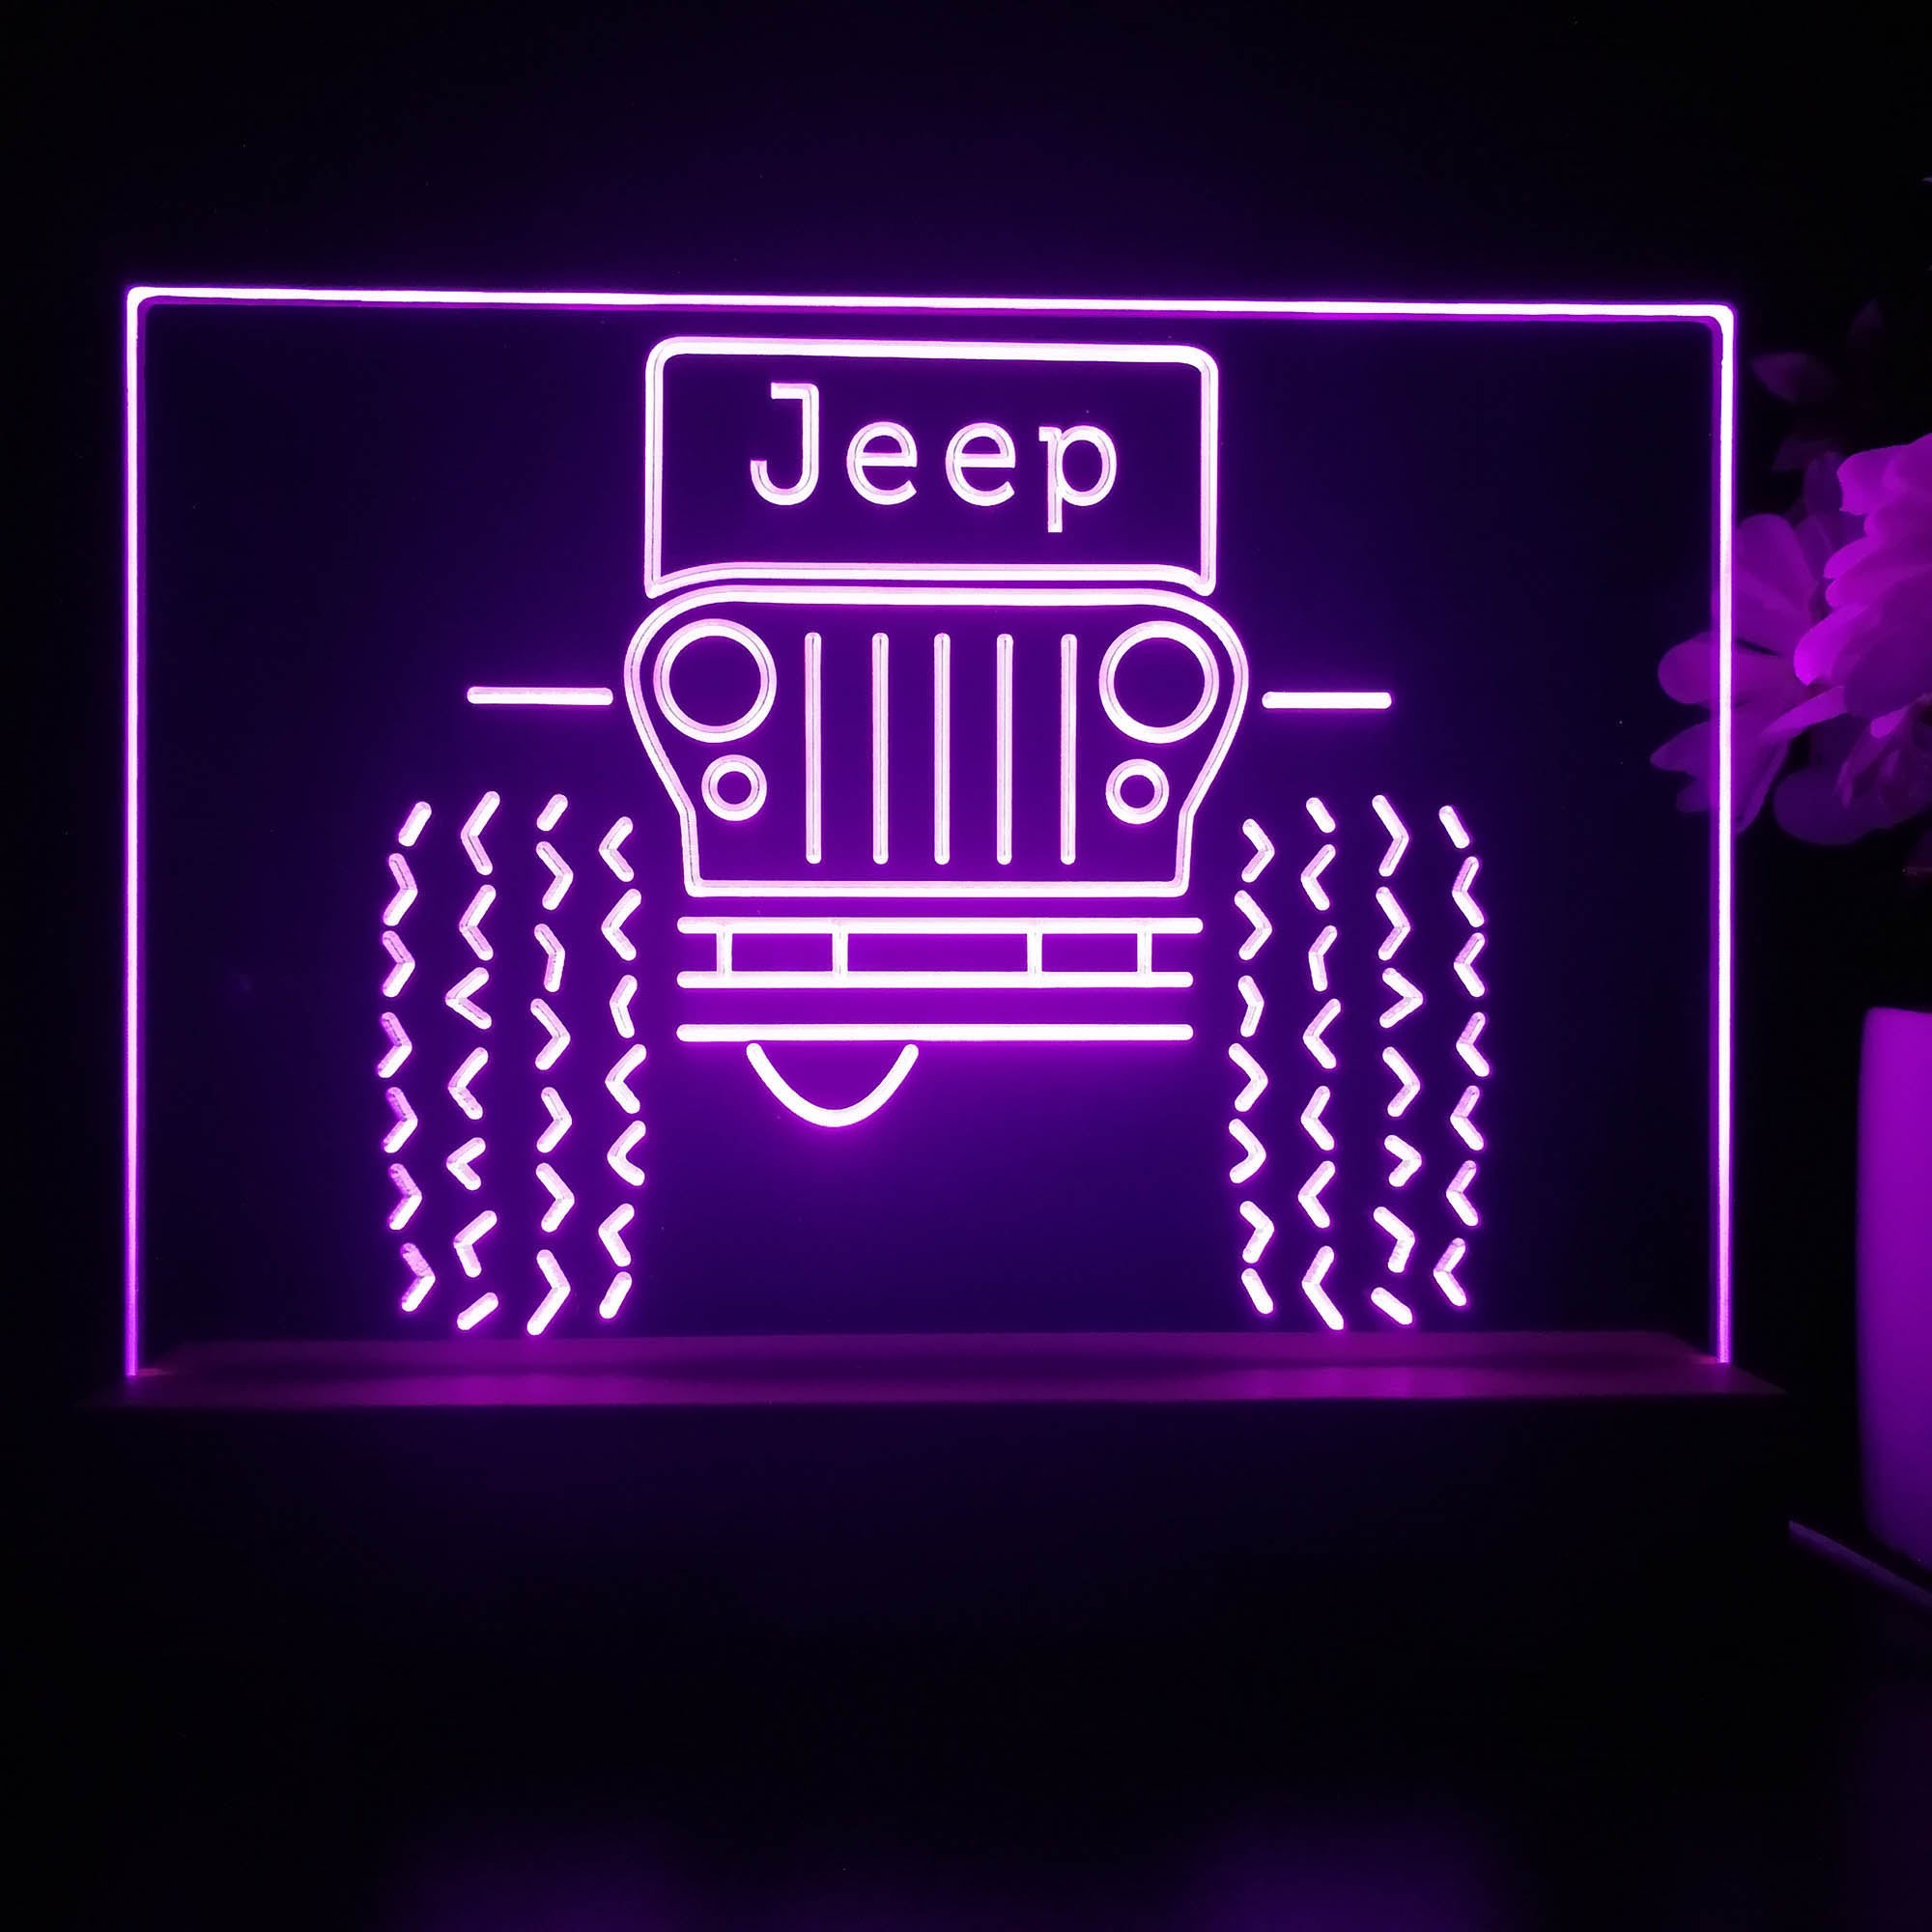 Only in a Jeep Truck Garage 3D Illusion Night Light Desk Lamp